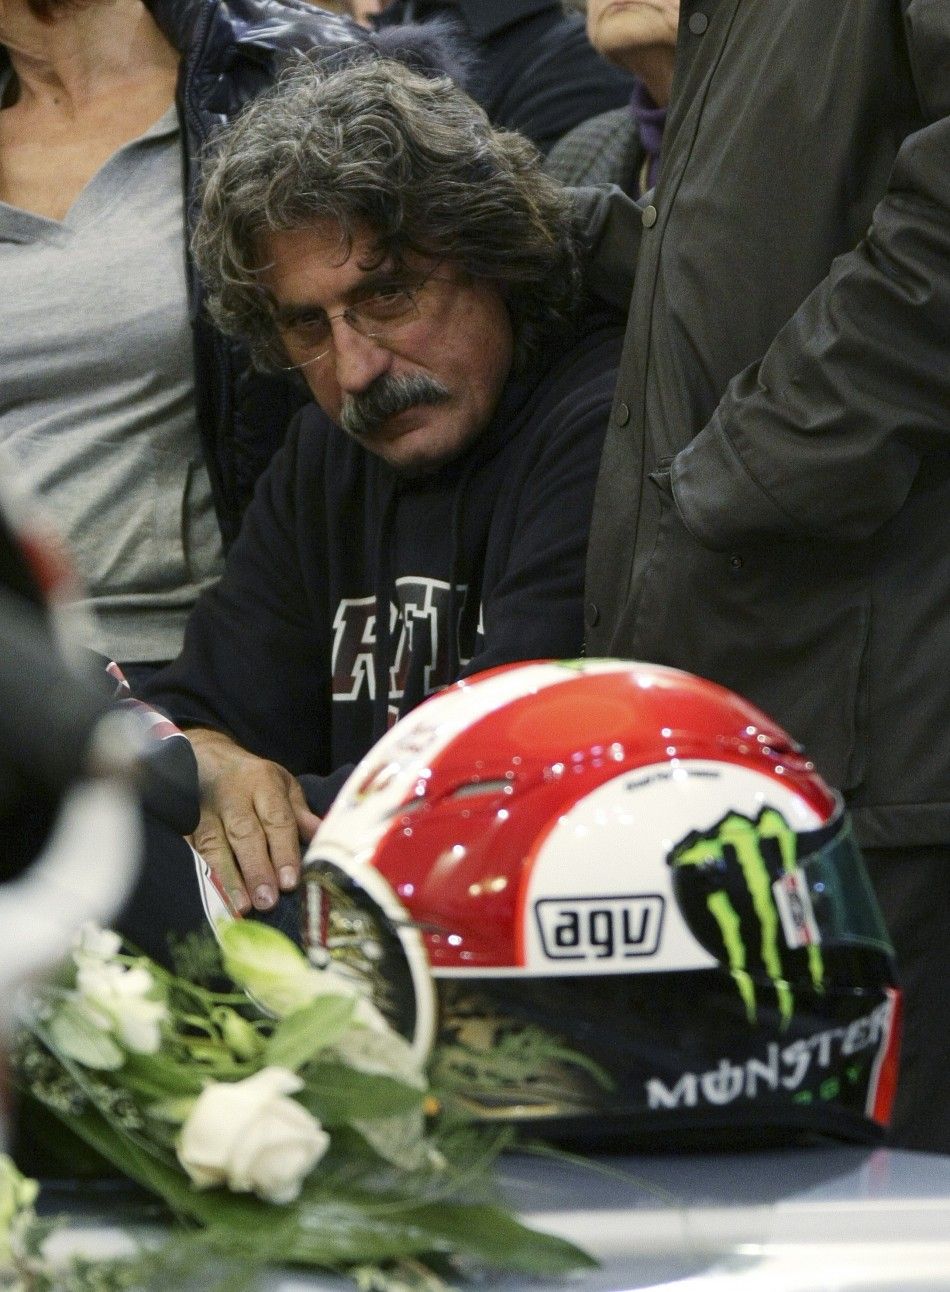 Paolo Simoncelli, the father of Marco Simoncelli, attends the funeral service of his son in Coriano